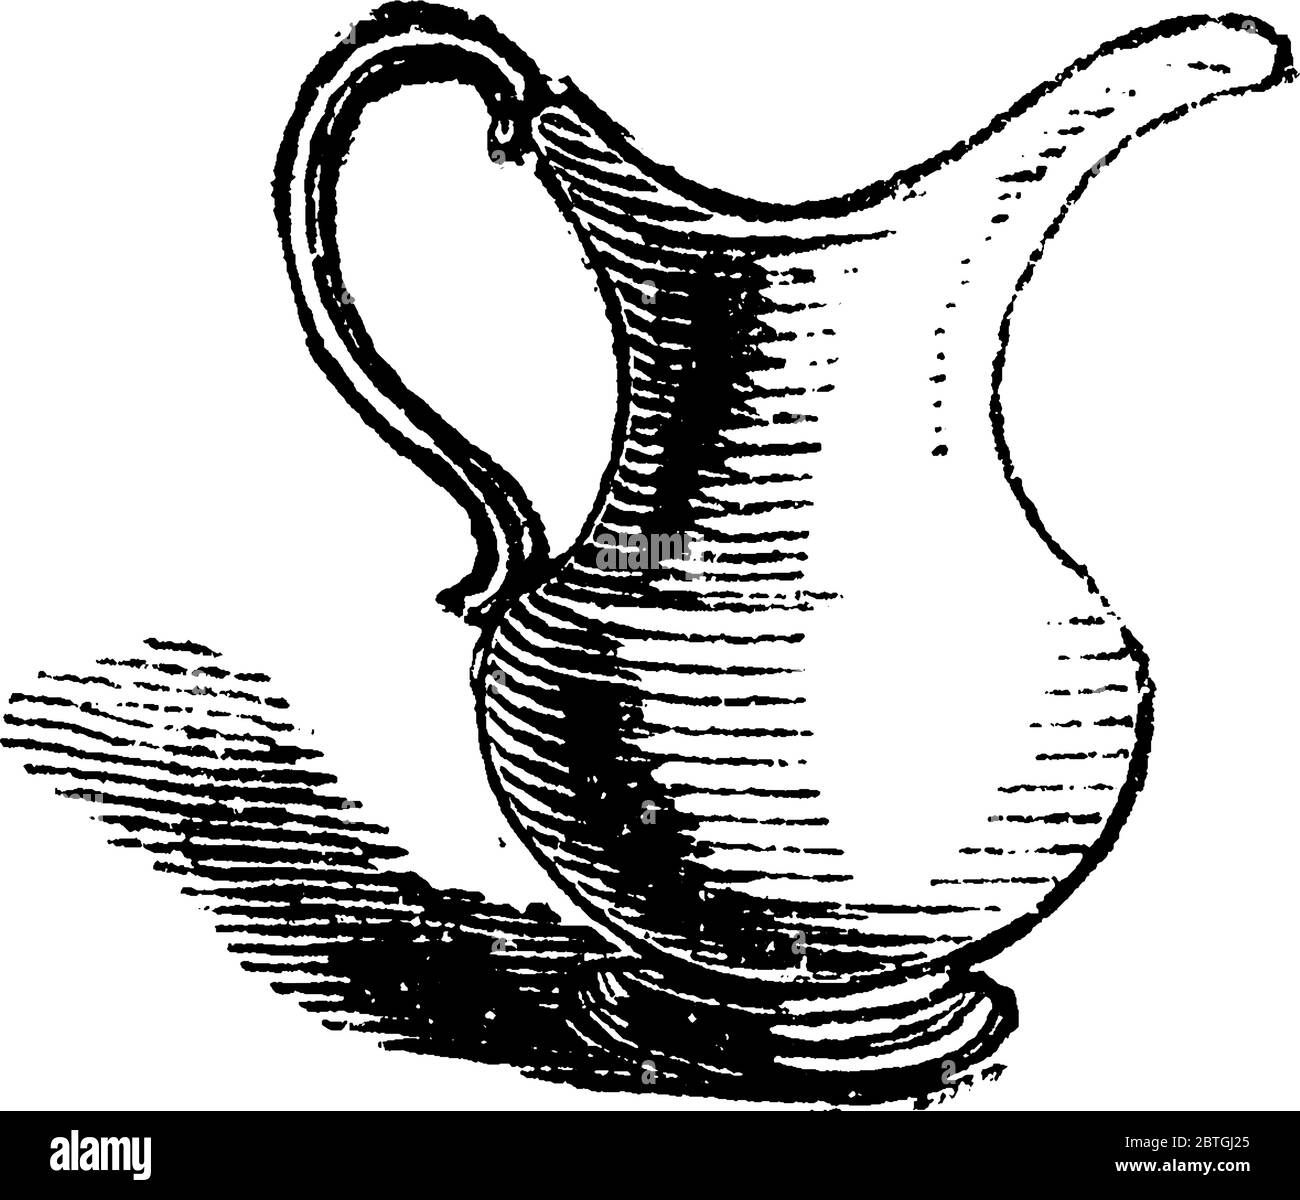 Pitcher is a container with handle and spout, used for storing and pouring liquid., vintage line drawing or engraving illustration. Stock Vector